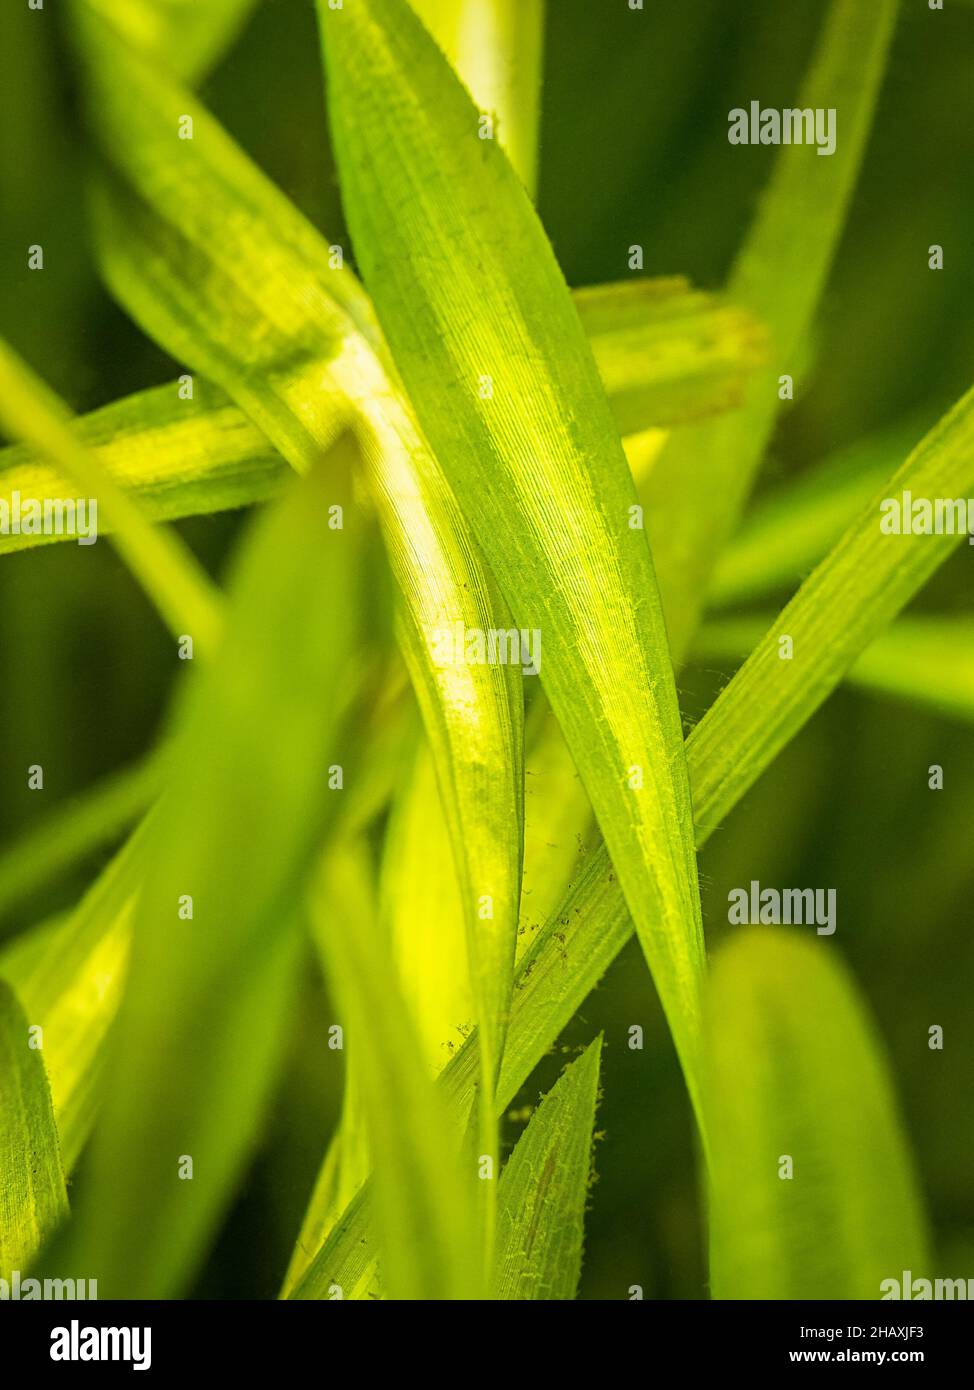 selective focus of vallisneria gigantea leafs in a fish tank with blurred background - aquatic plant Stock Photo